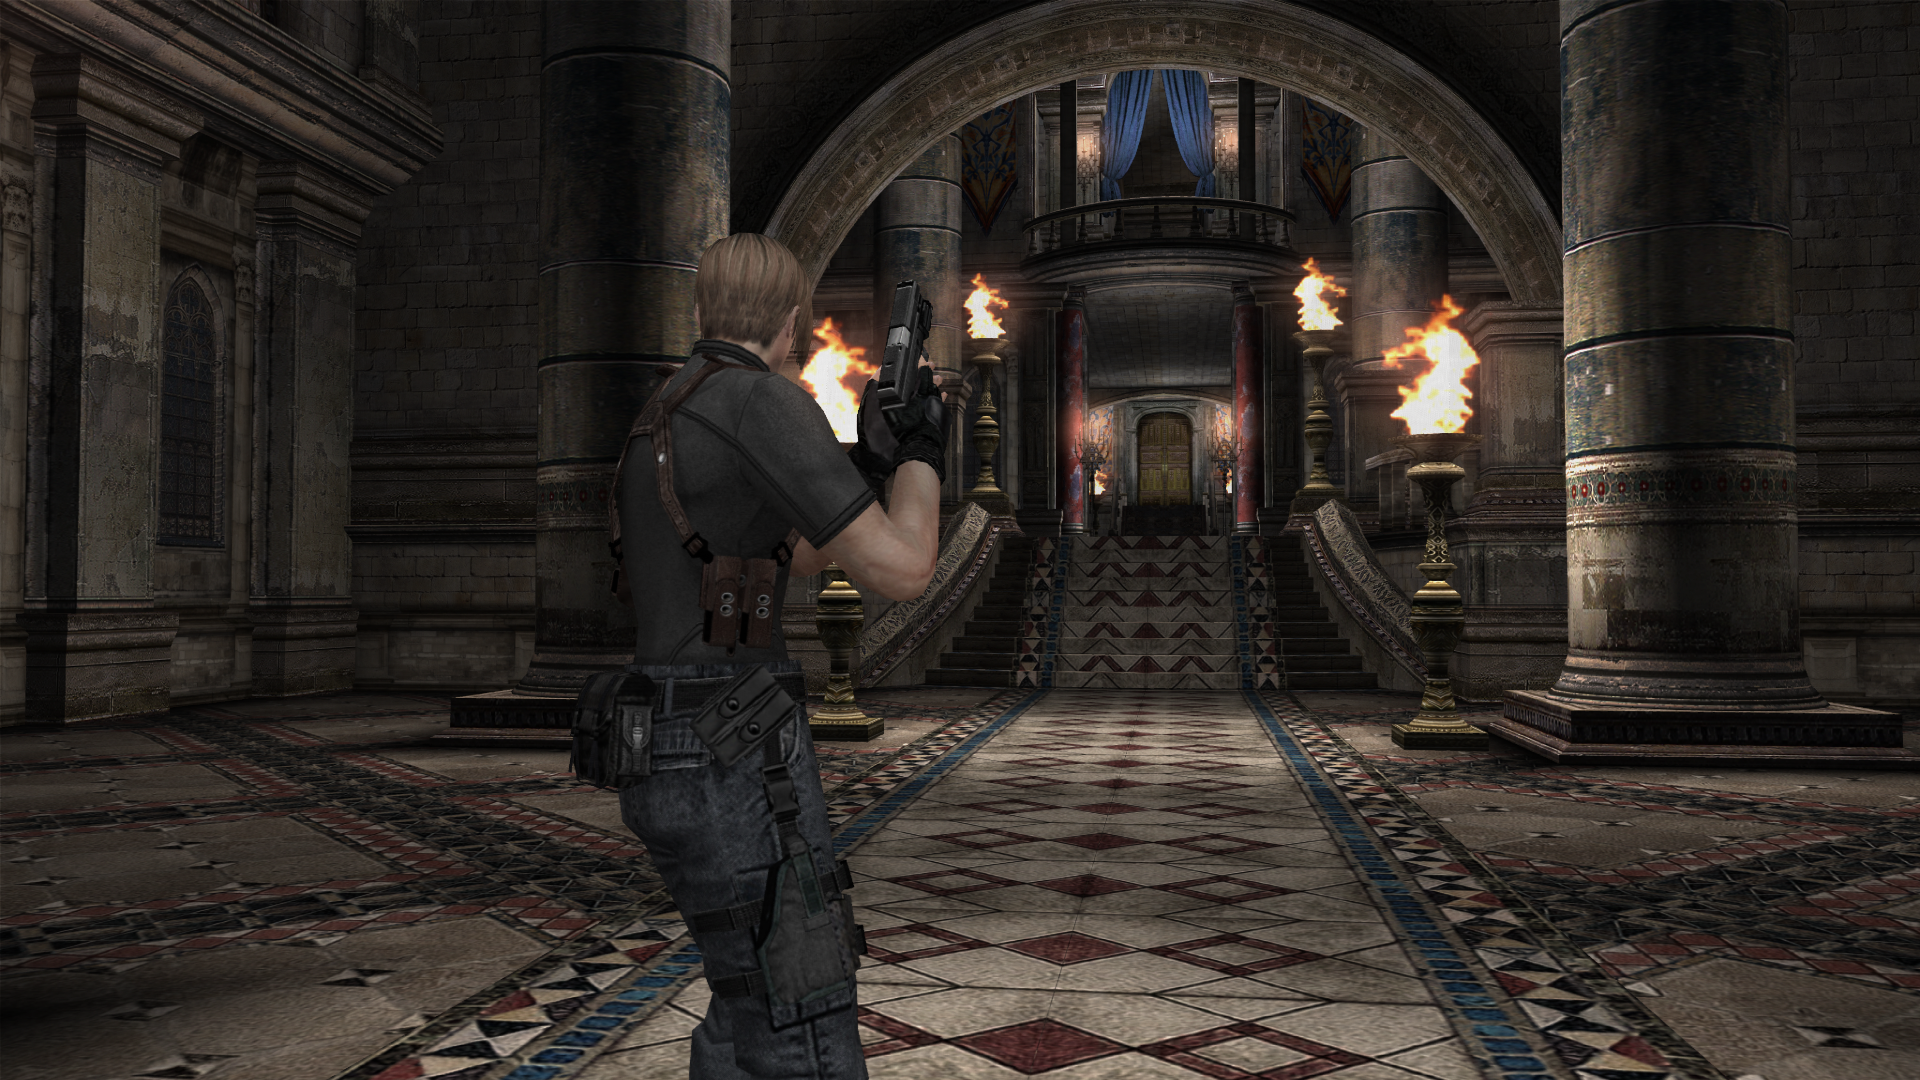 Steam resident evil 4 ultimate hd фото 76